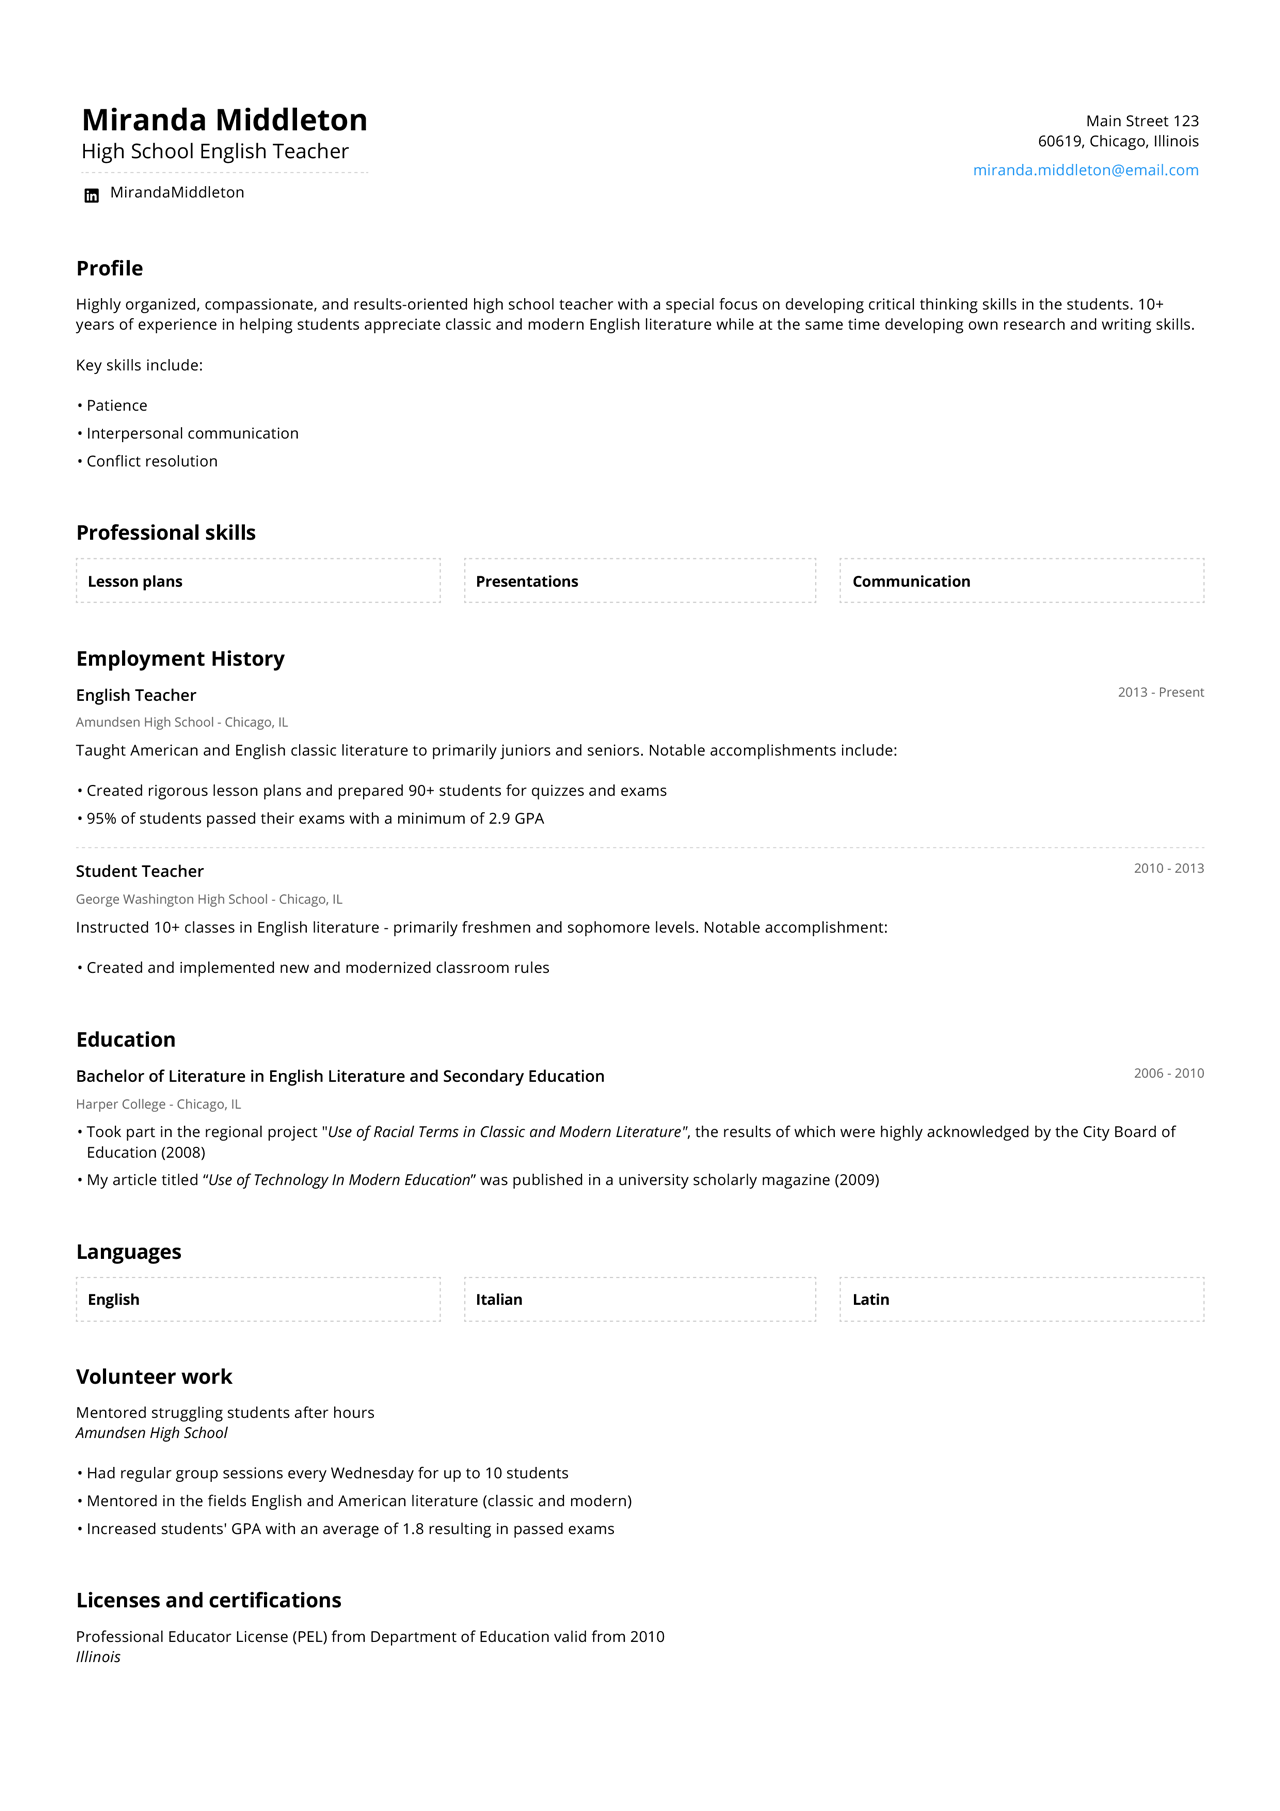 Image of a high school teacher resume with more than 10 years of experience